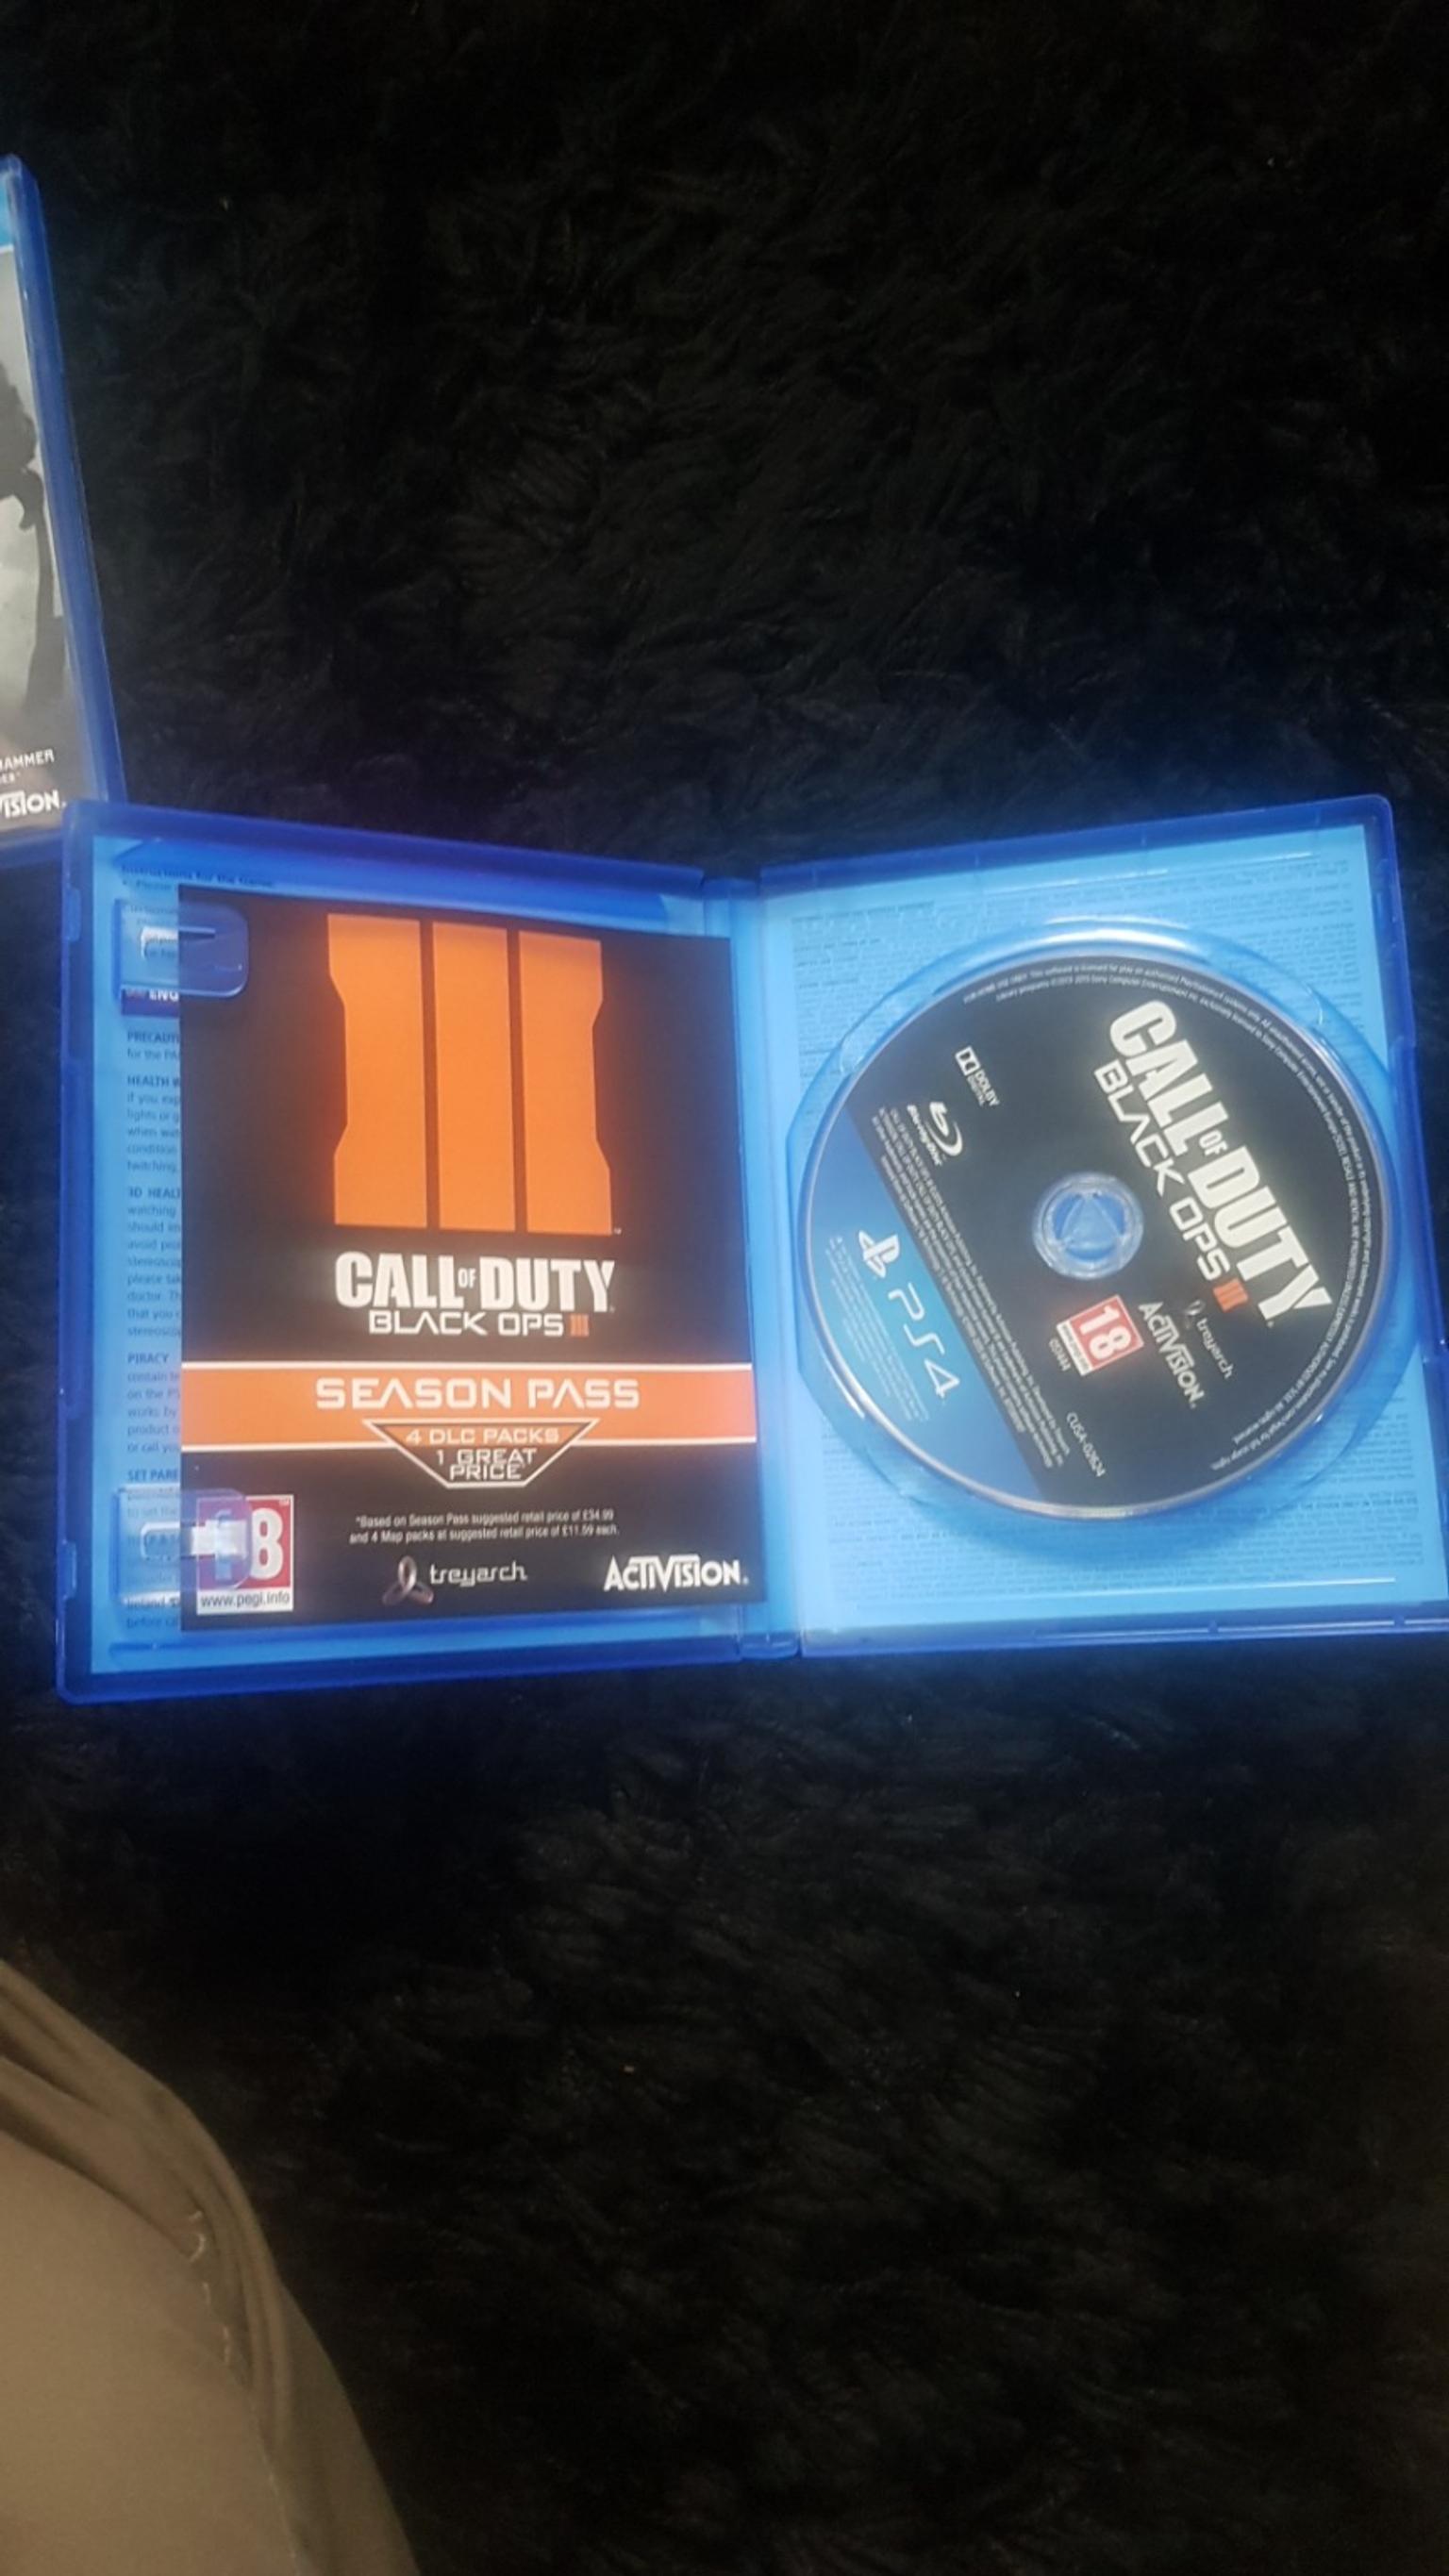 black ops 3 ps4 cex